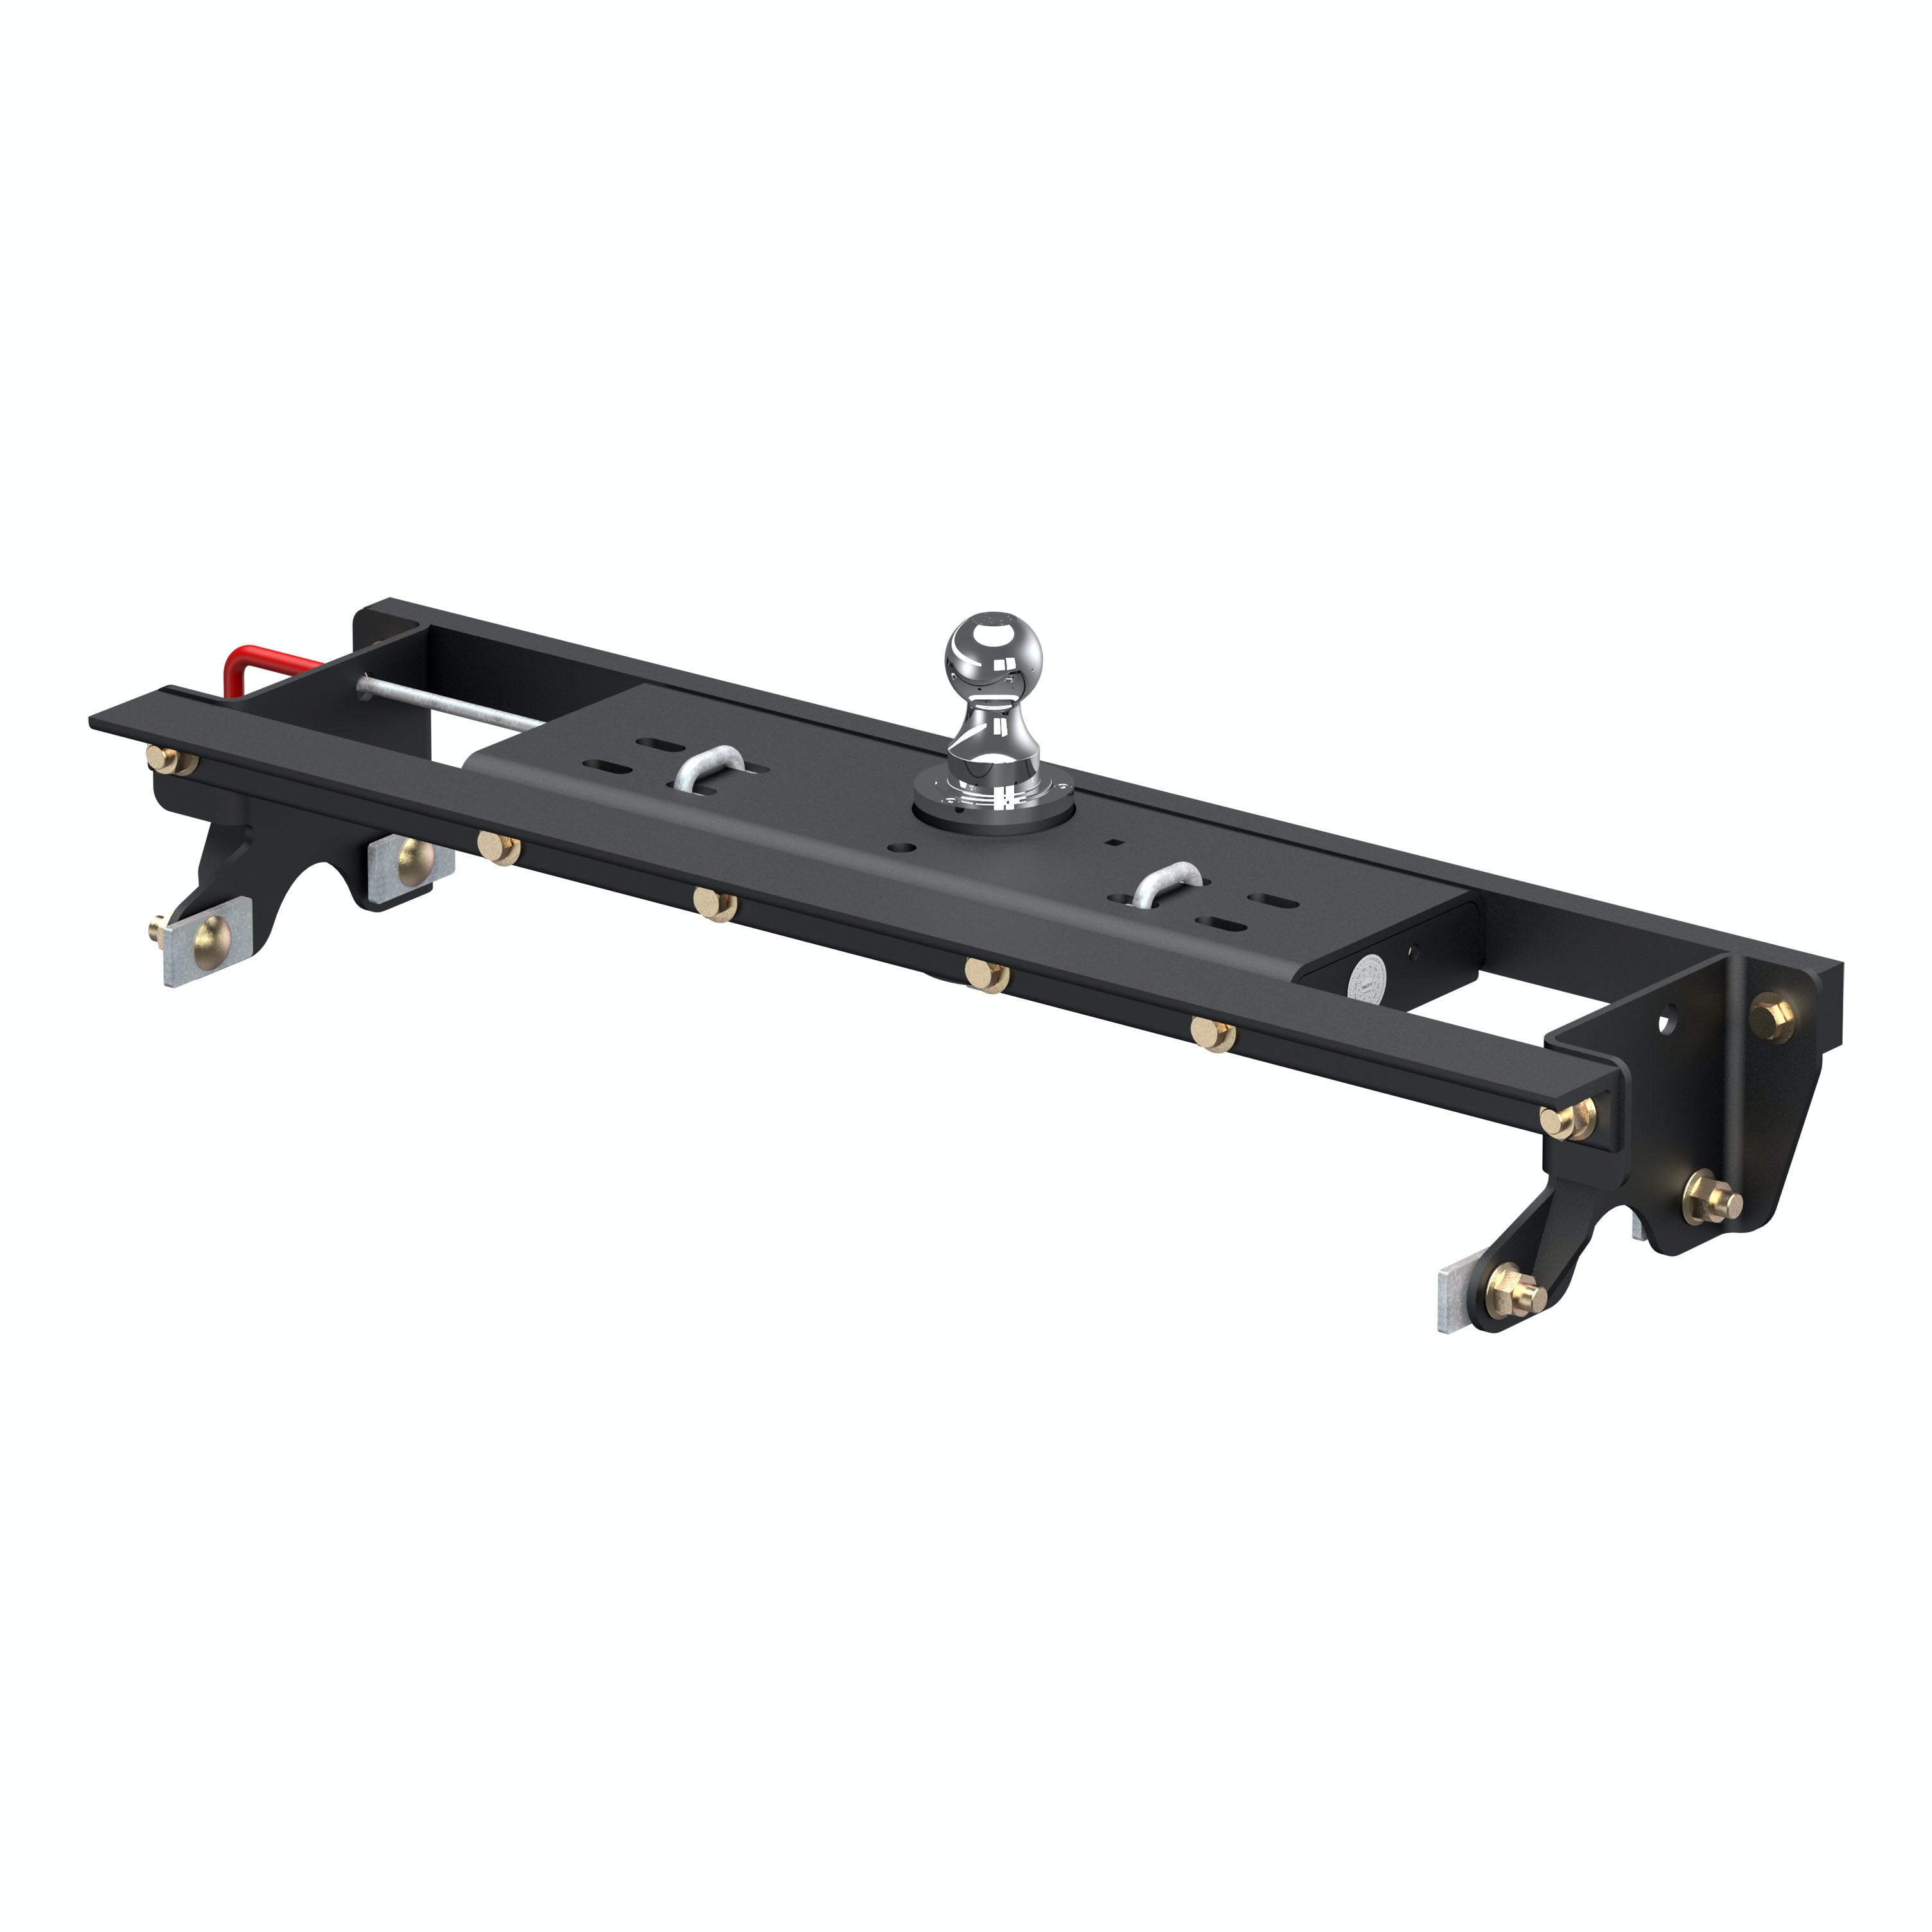 CURT 60724 Double Lock Gooseneck Hitch Kit with Brackets, Select Ford F-150